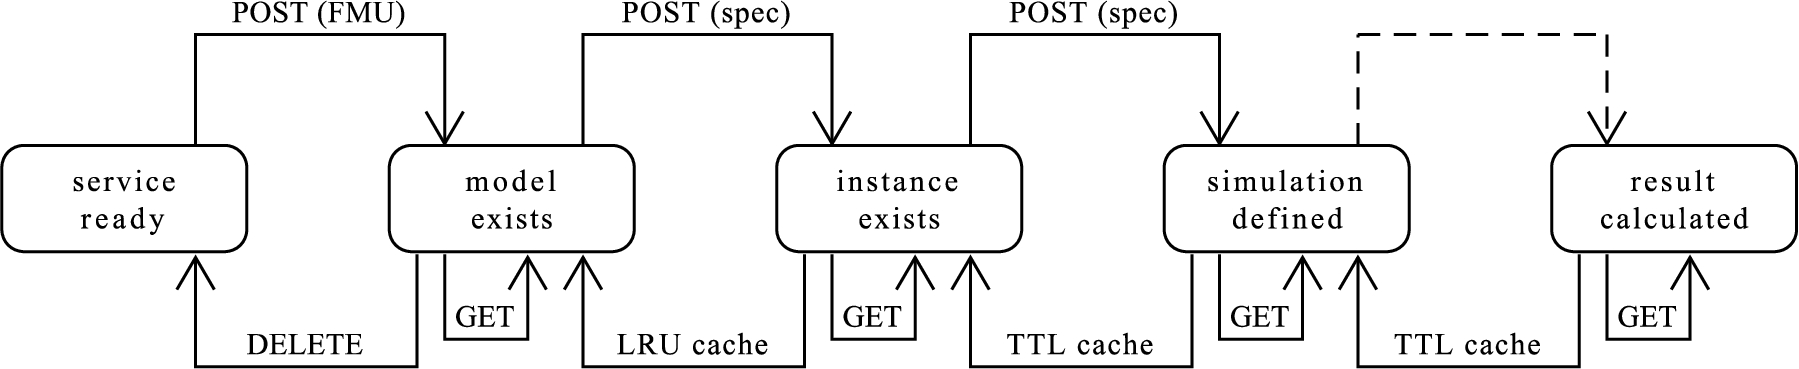 New resources are created by sending their specifications to the service instance; except for the simulation result which is added as soon as it becomes available. Its calculation is triggered when a new simulation is specified. Model instances, simulations and simulation results are not stored indefinitely to keep storage requirements limited.